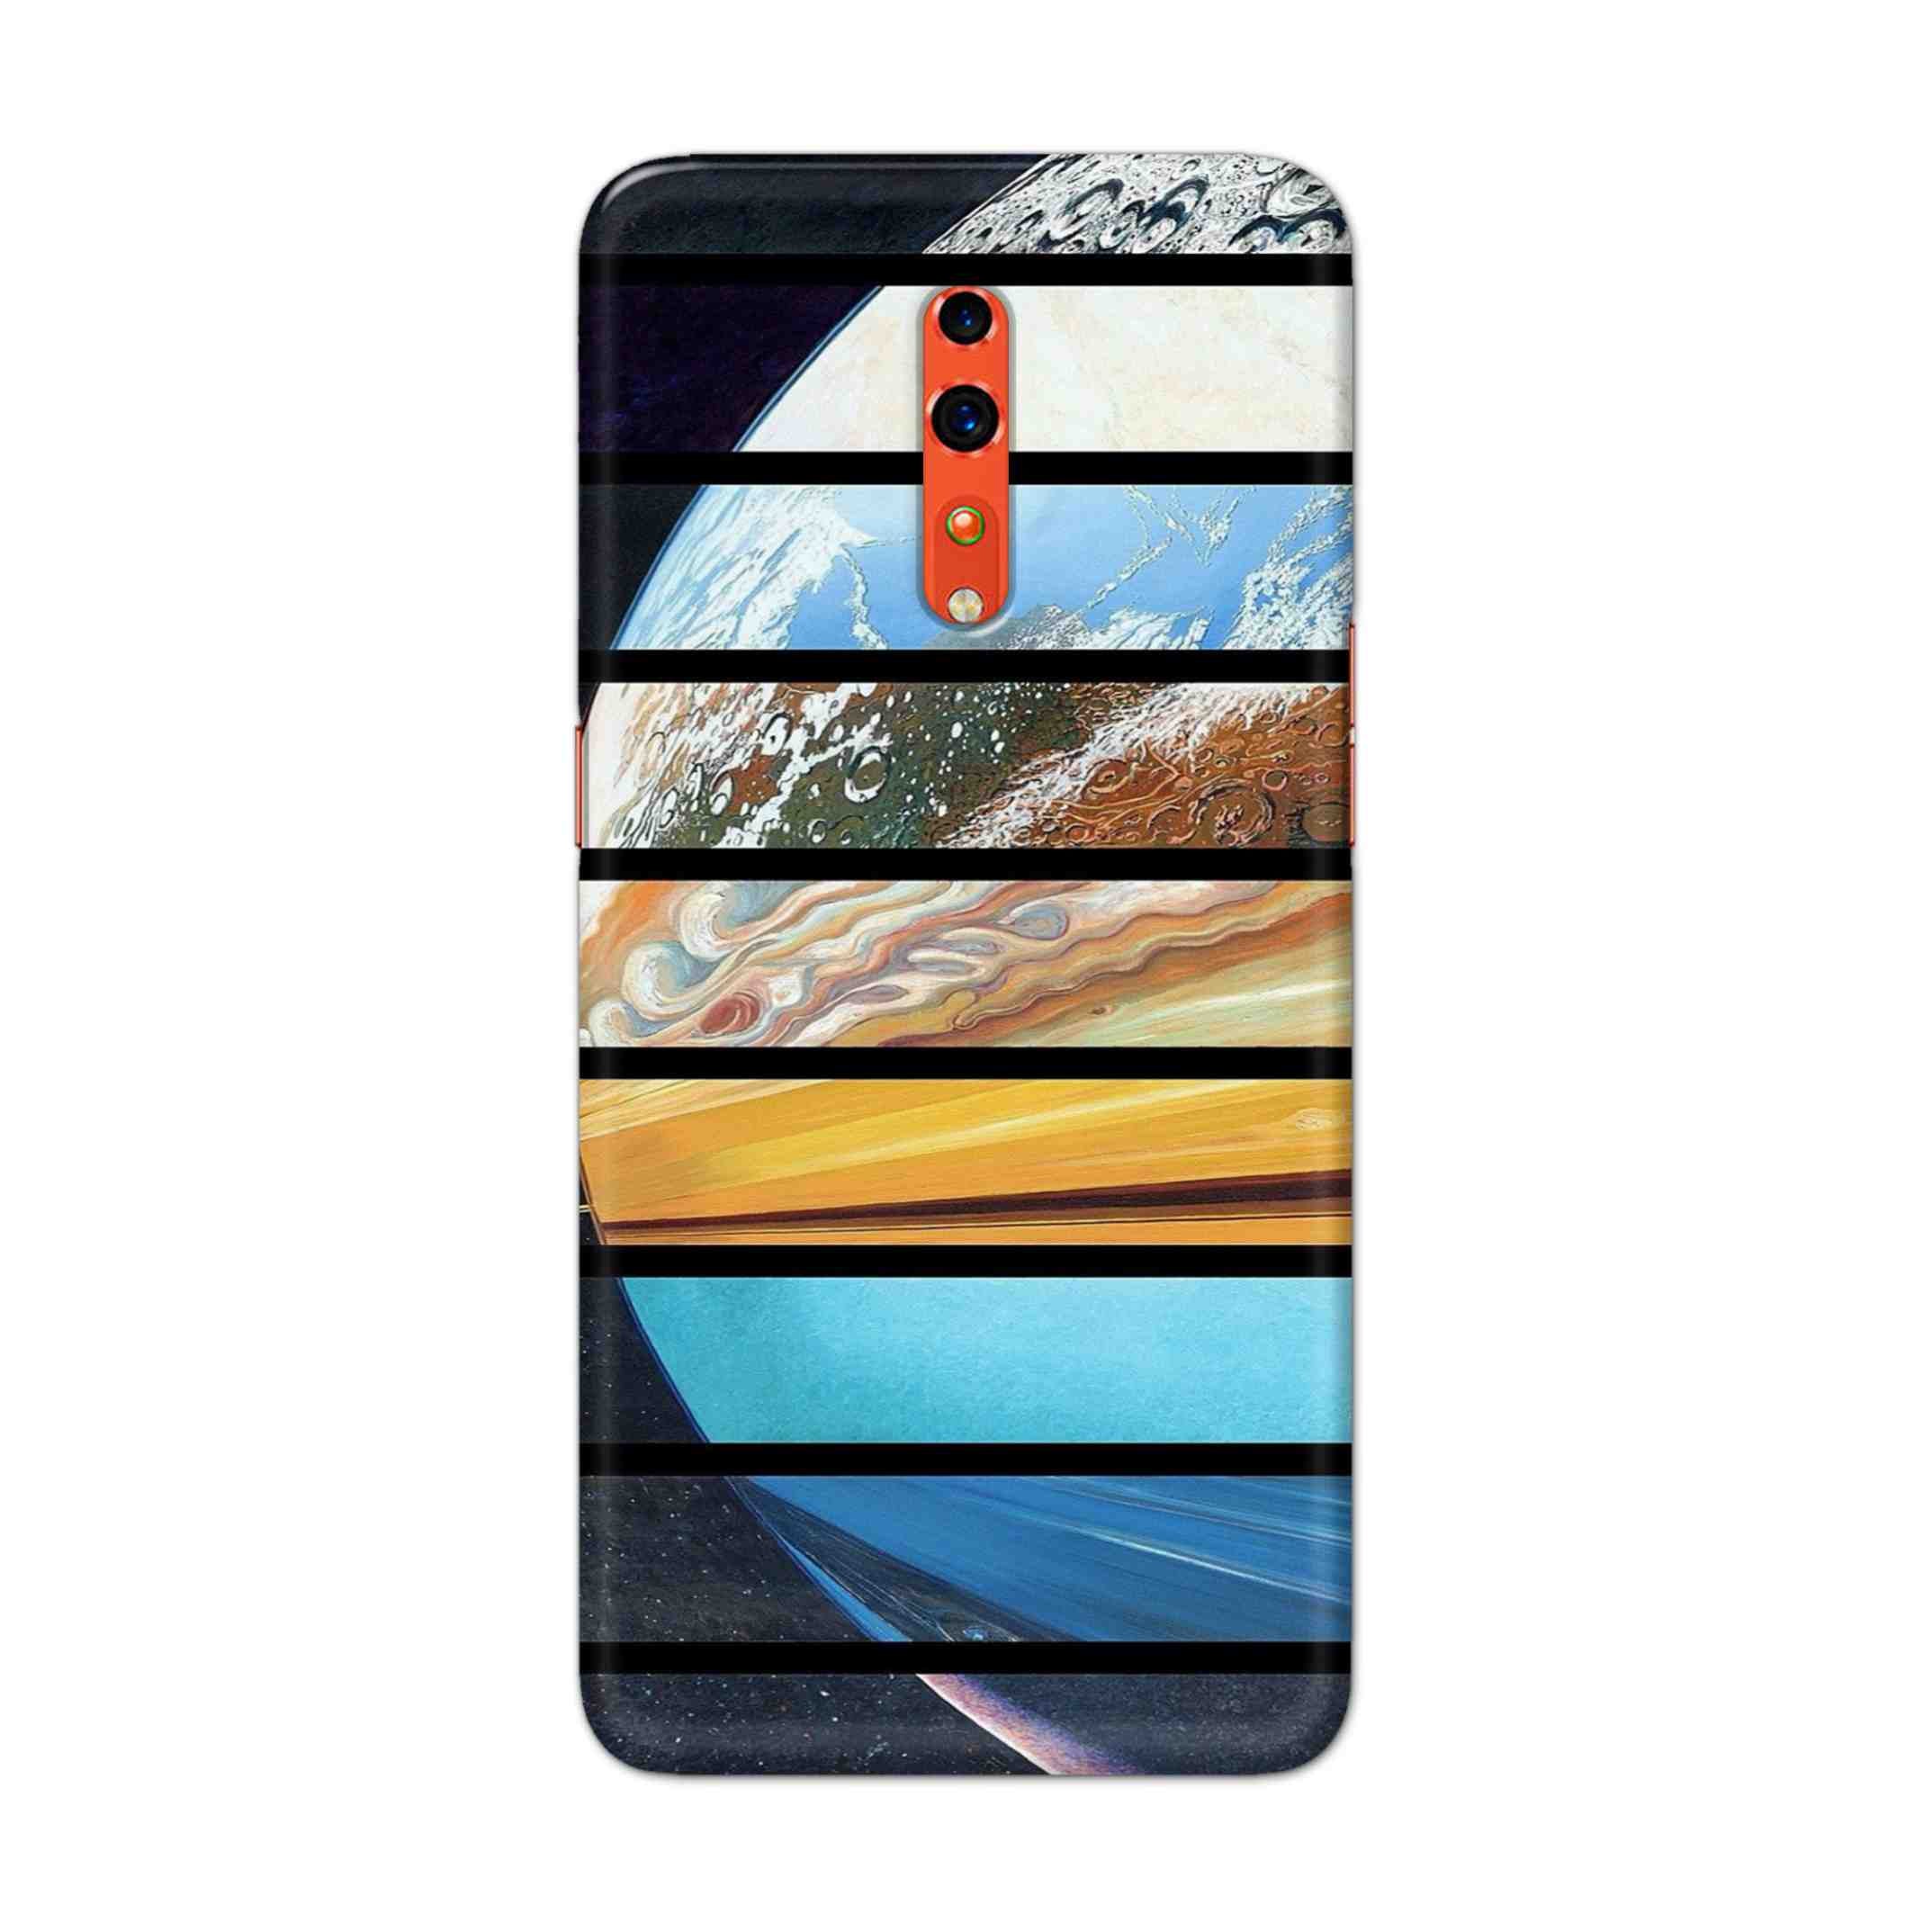 Buy Colourful Earth Hard Back Mobile Phone Case Cover For OPPO Reno Z Online